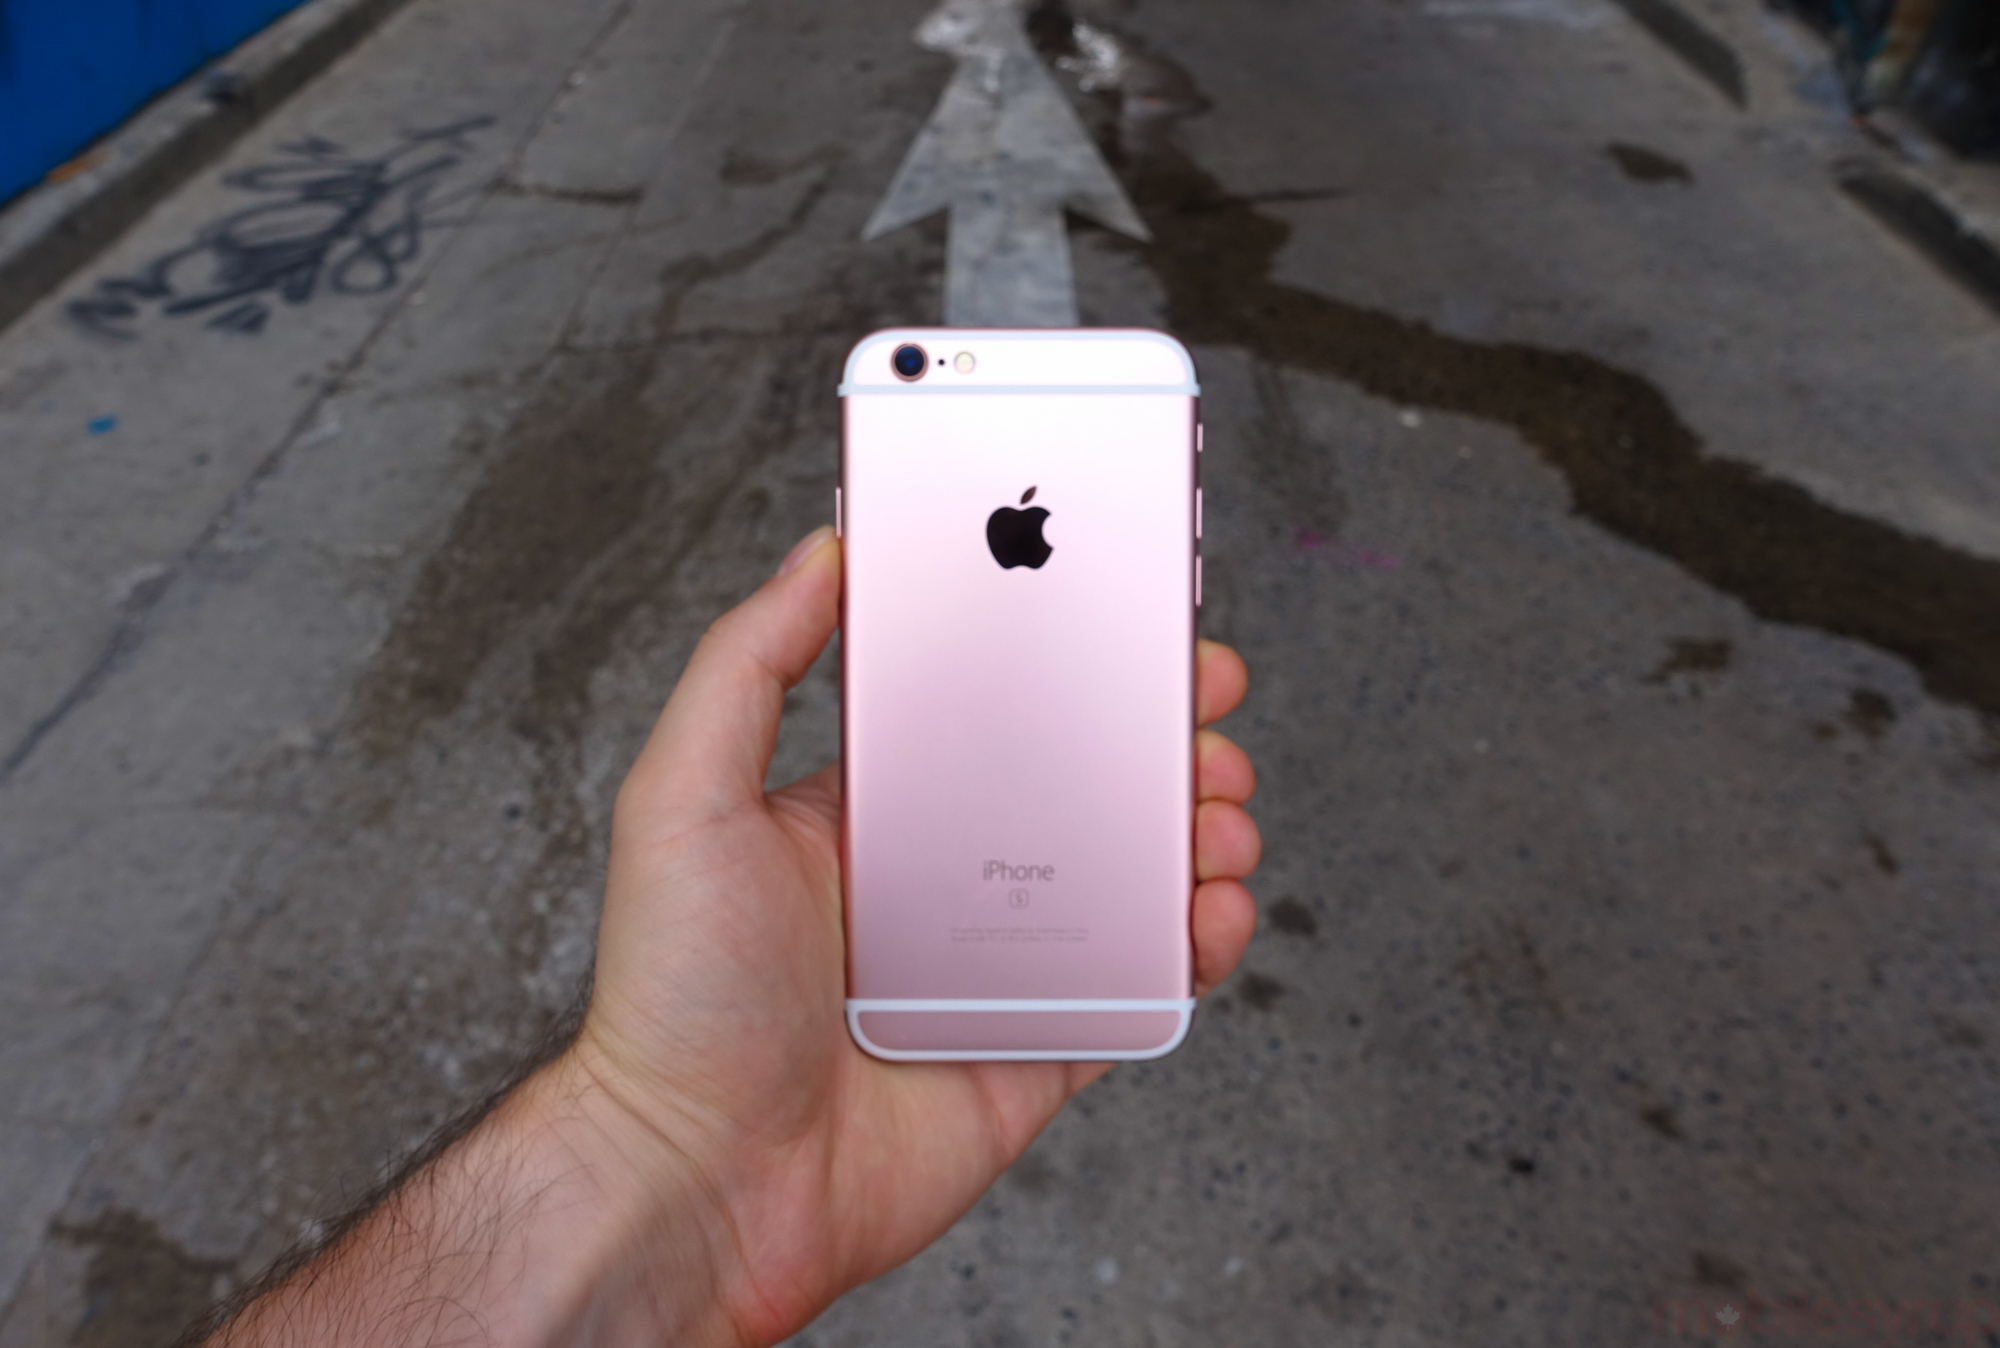 iphone6sreview-01268